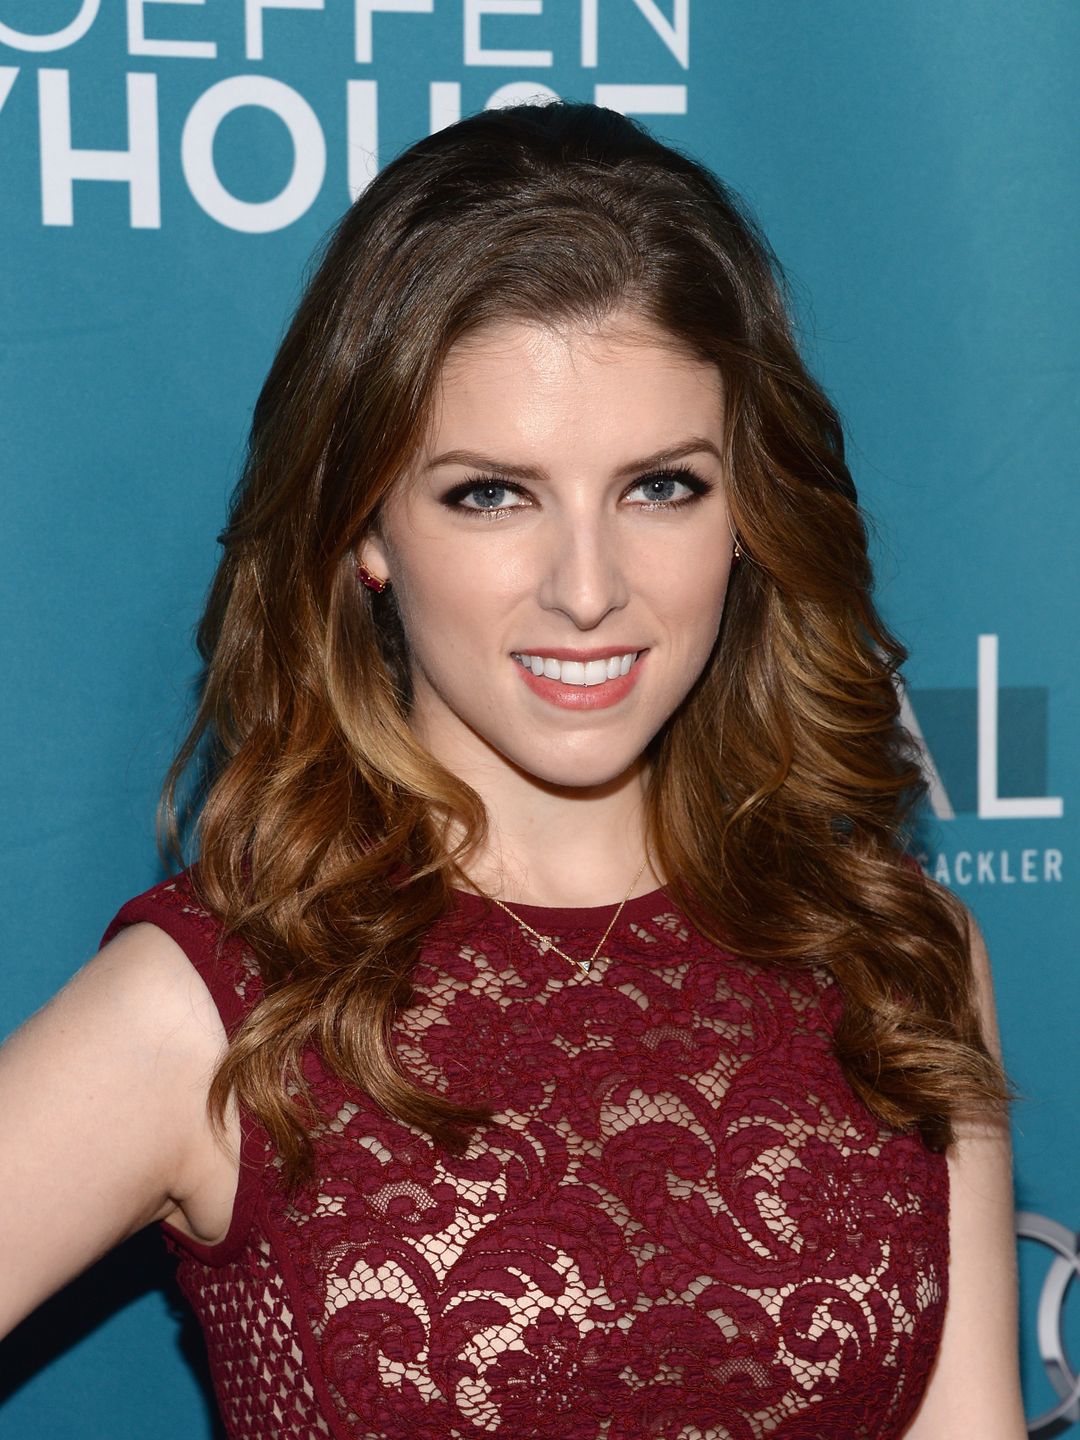 Anna Kendrick who is she